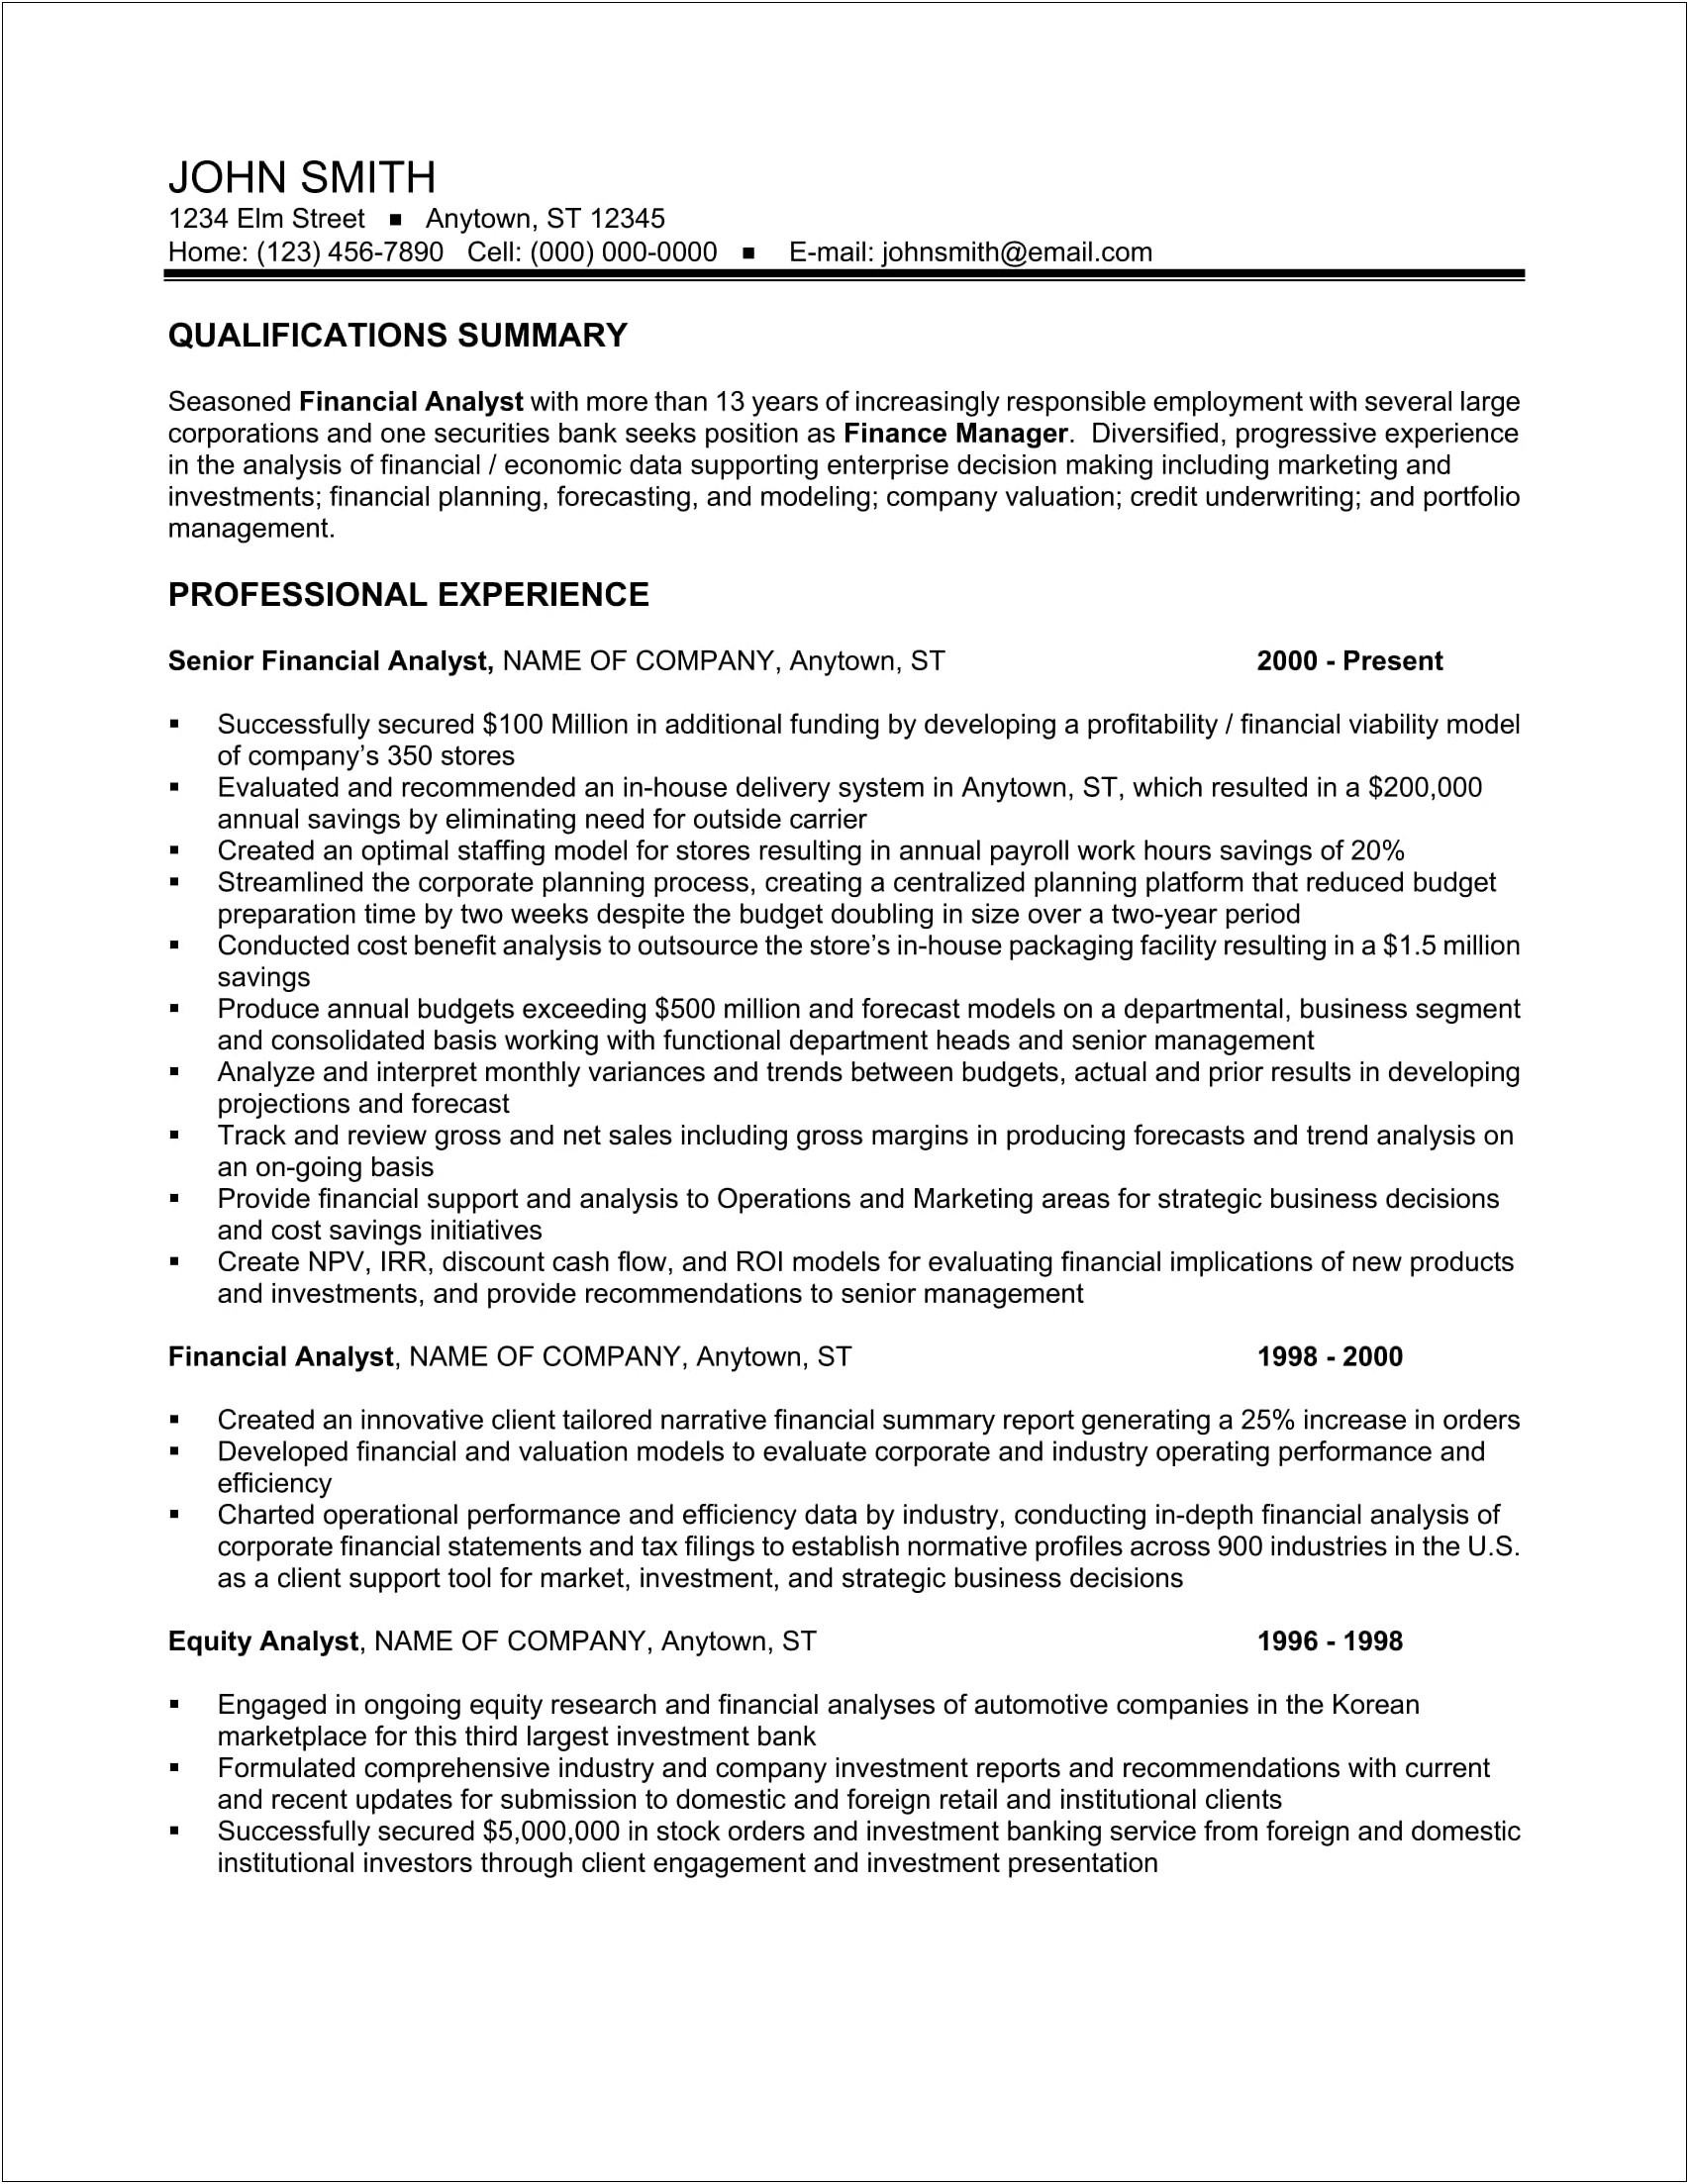 Investment Banking Financial Analyst Resume Sample